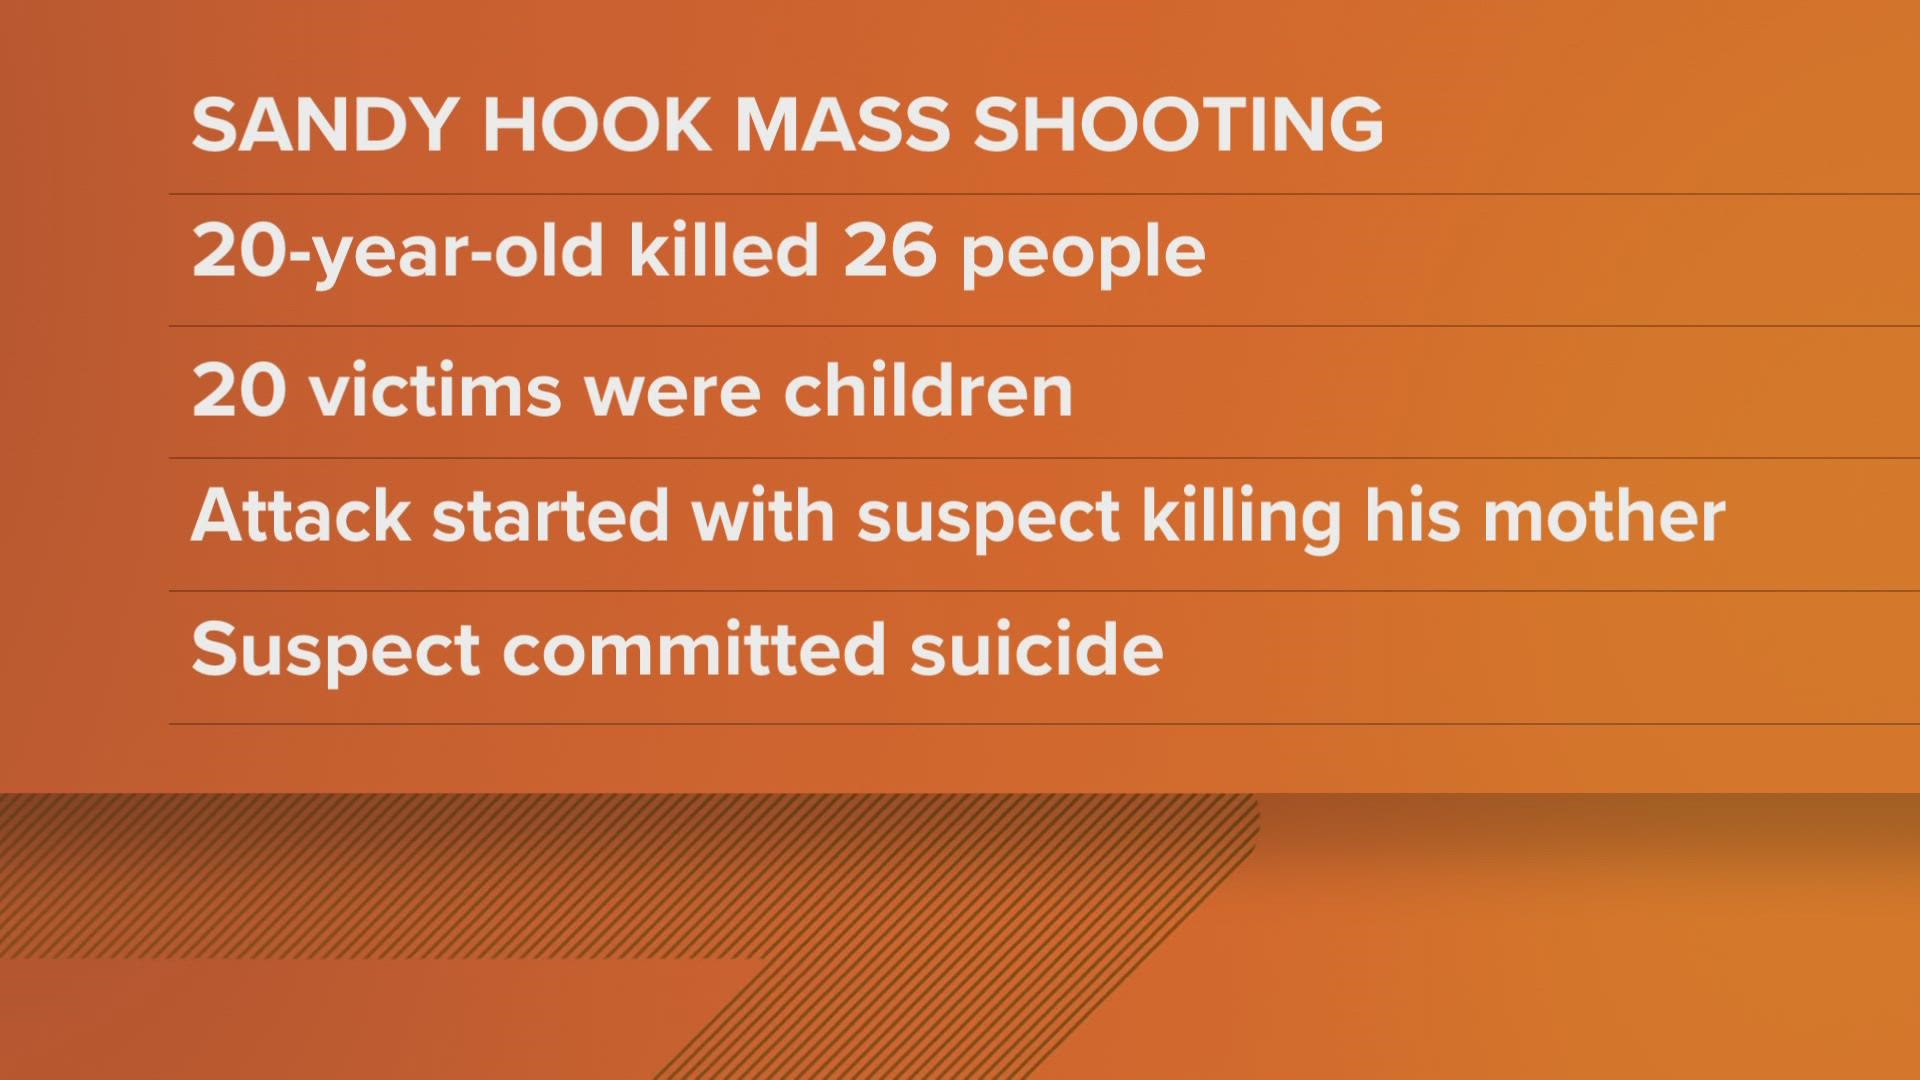 With so many similarities, the comparison to the Sandy Hook Elementary School shooting became a a part of the conversation.